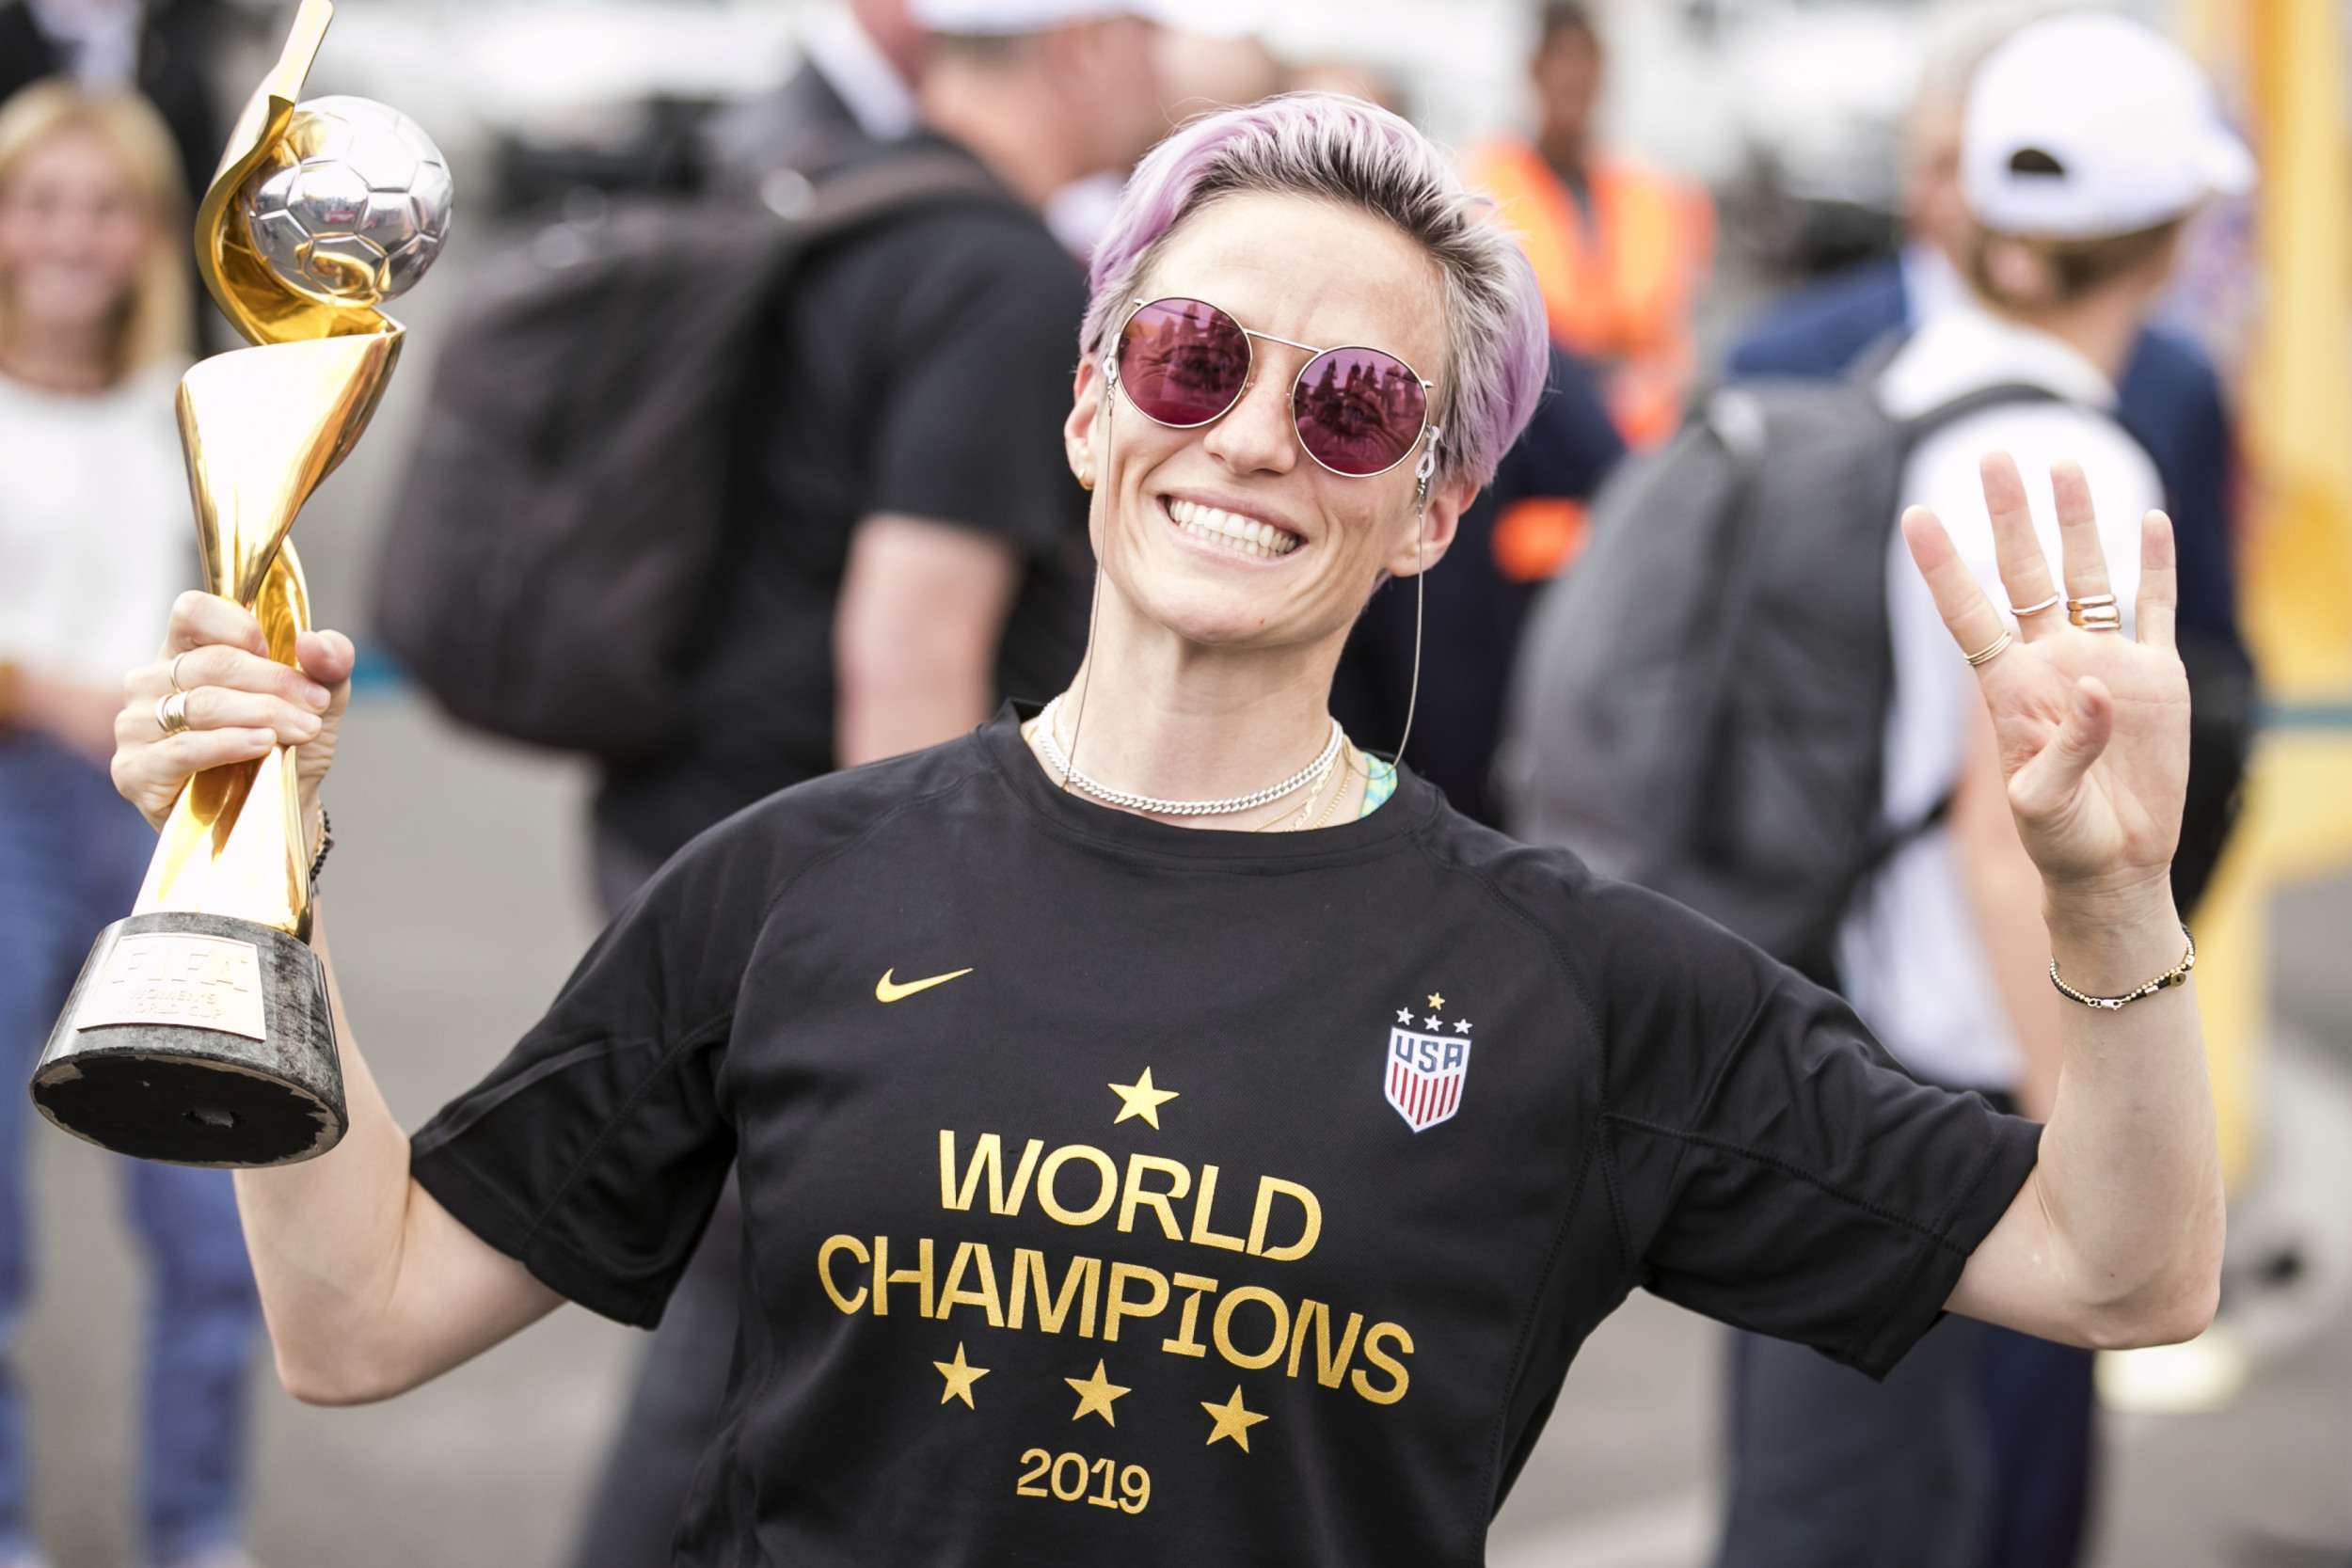 Megan Rapinoe For President Us Soccer Star Is Tied With Donald Trump In Very Hypothetical 